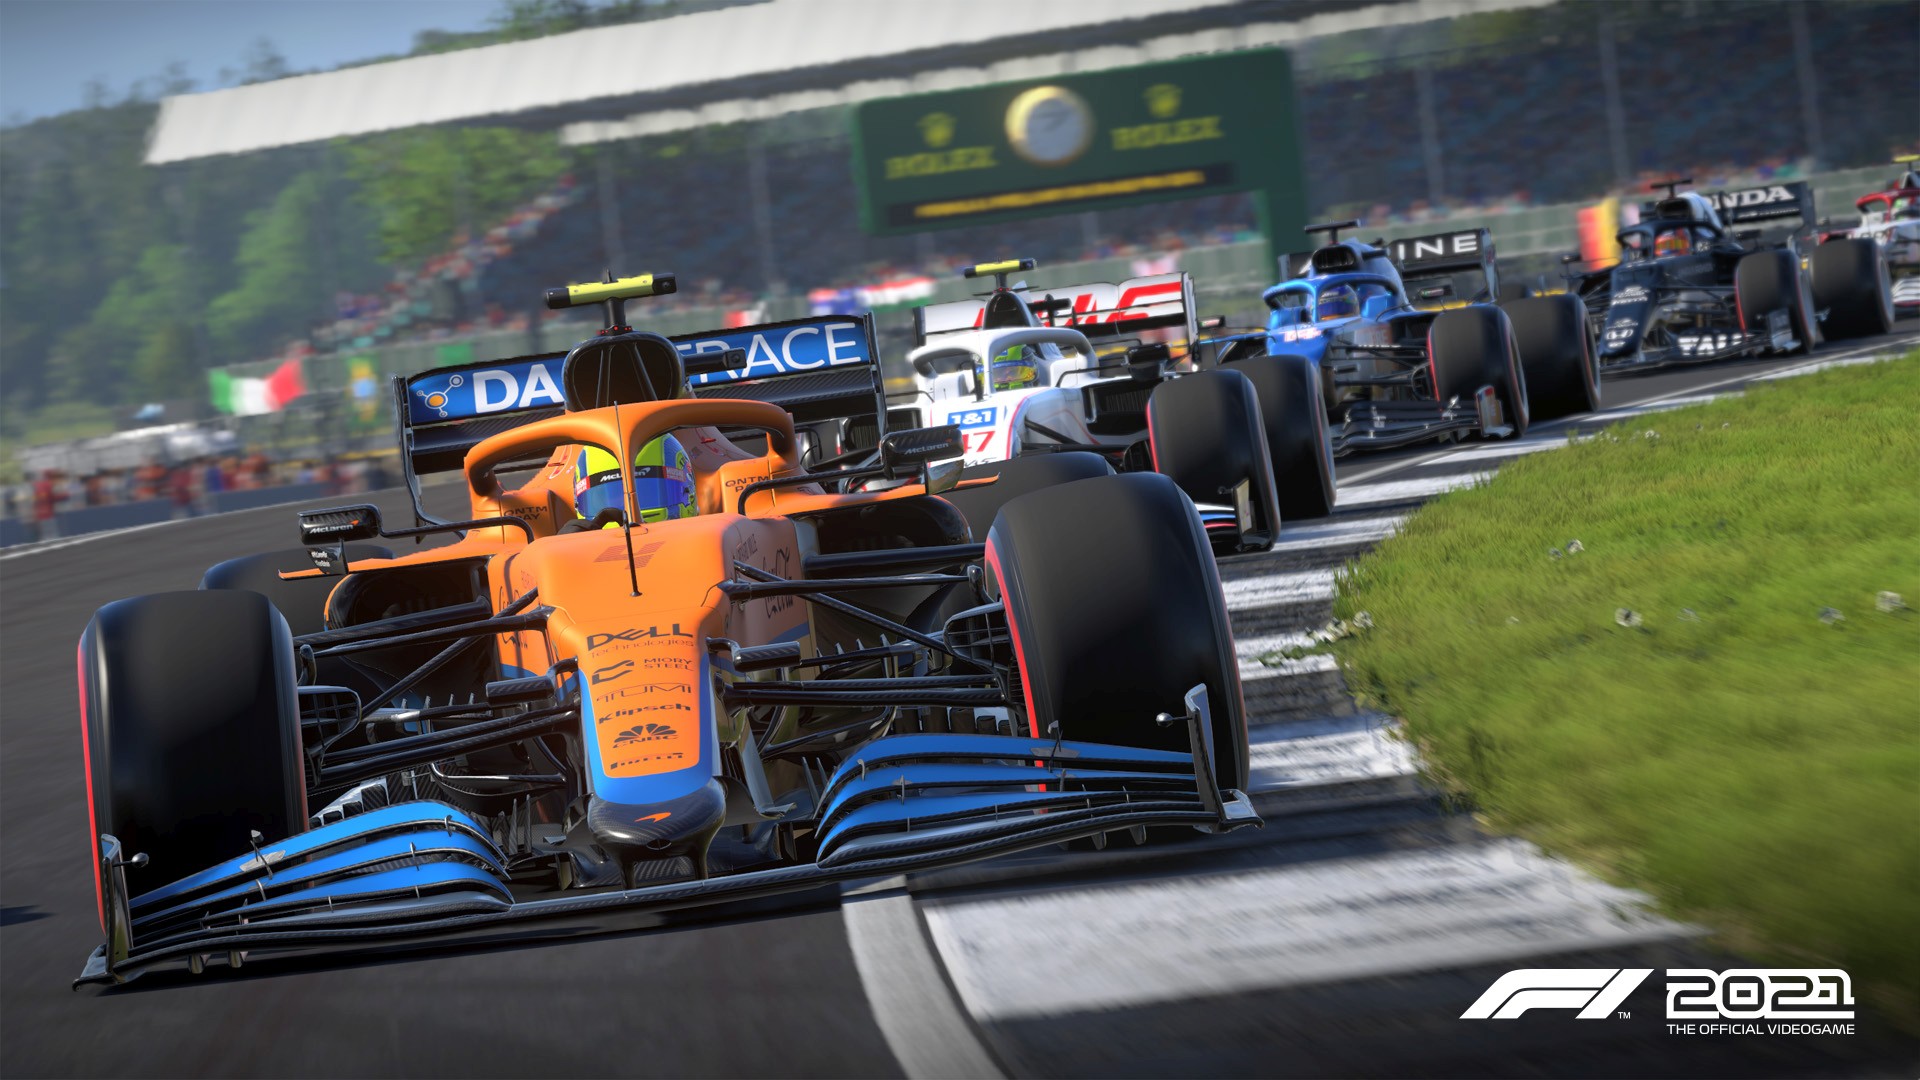 Codemasters on X: Looking 🔛 point 🔵 The 'Kompass - Dot' Premium livery  will keep you looking sharp in #F12019's multiplayer #DLCShowcase Available  on Xbox One, PS4, and PC via Steam for £